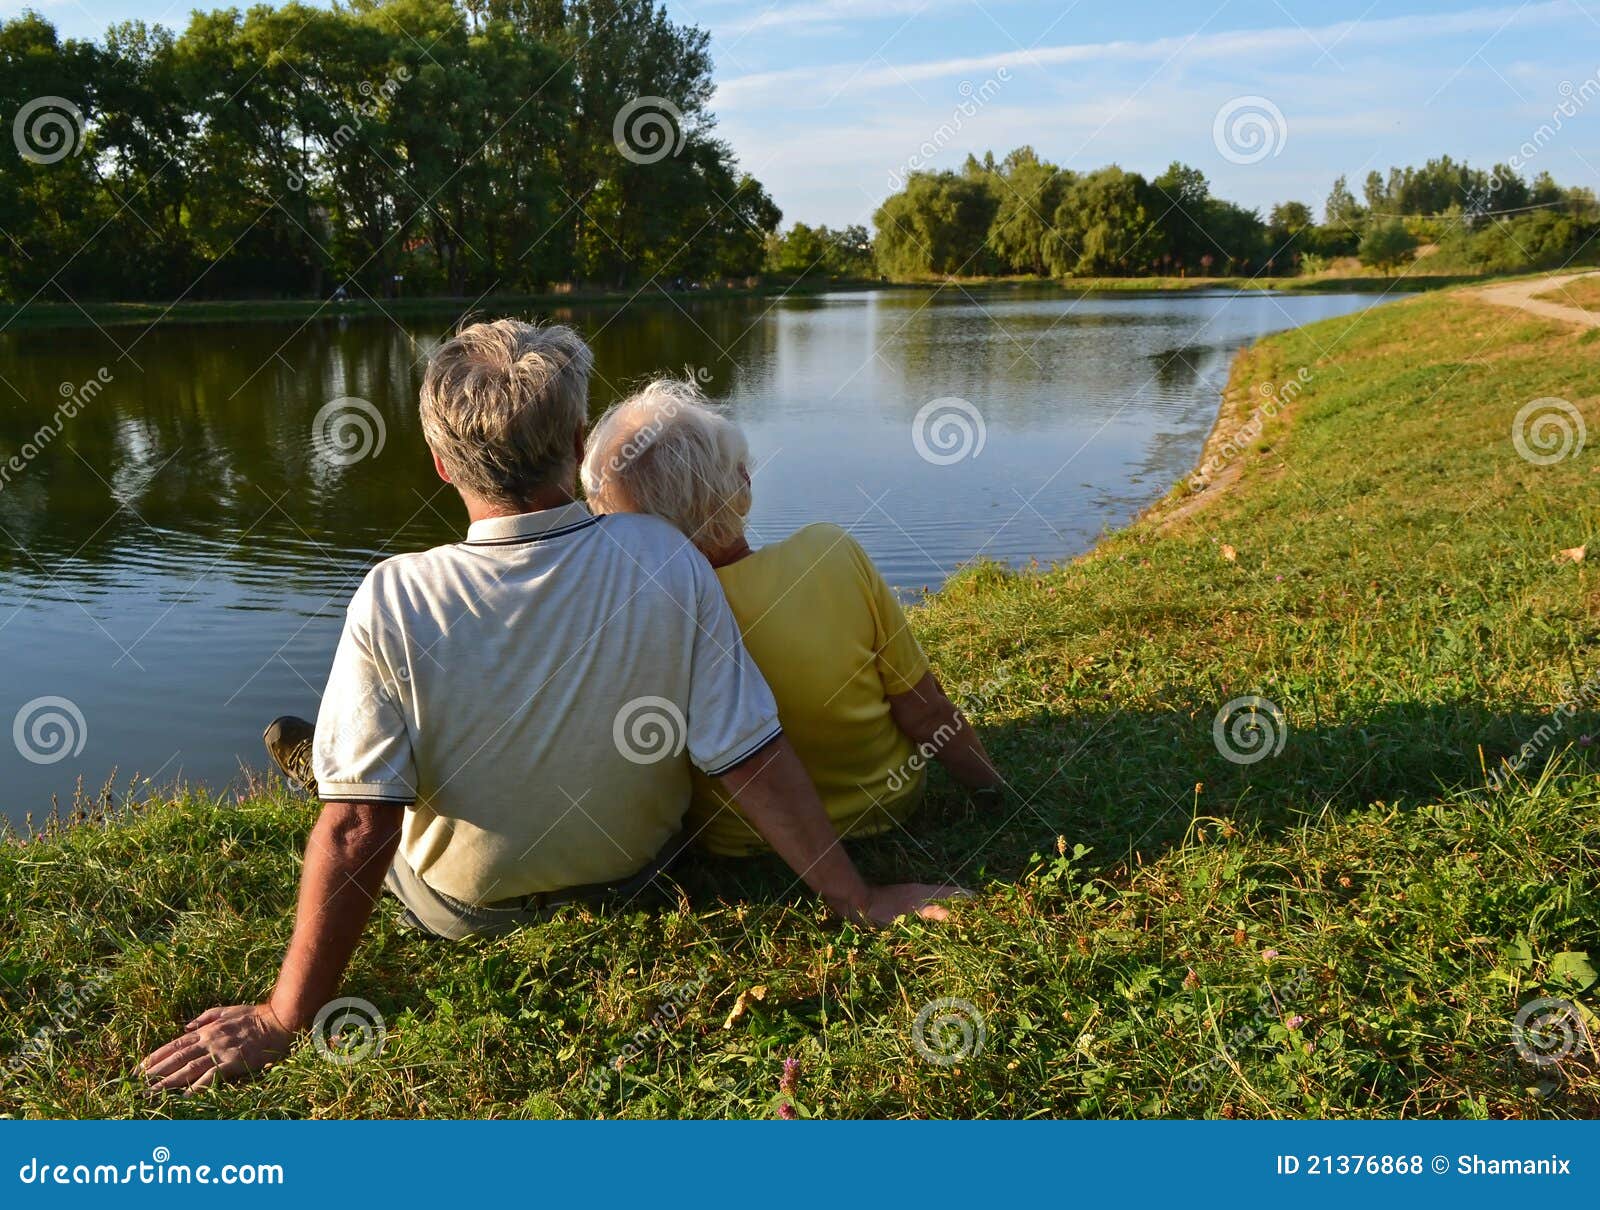 retired couple relaxing